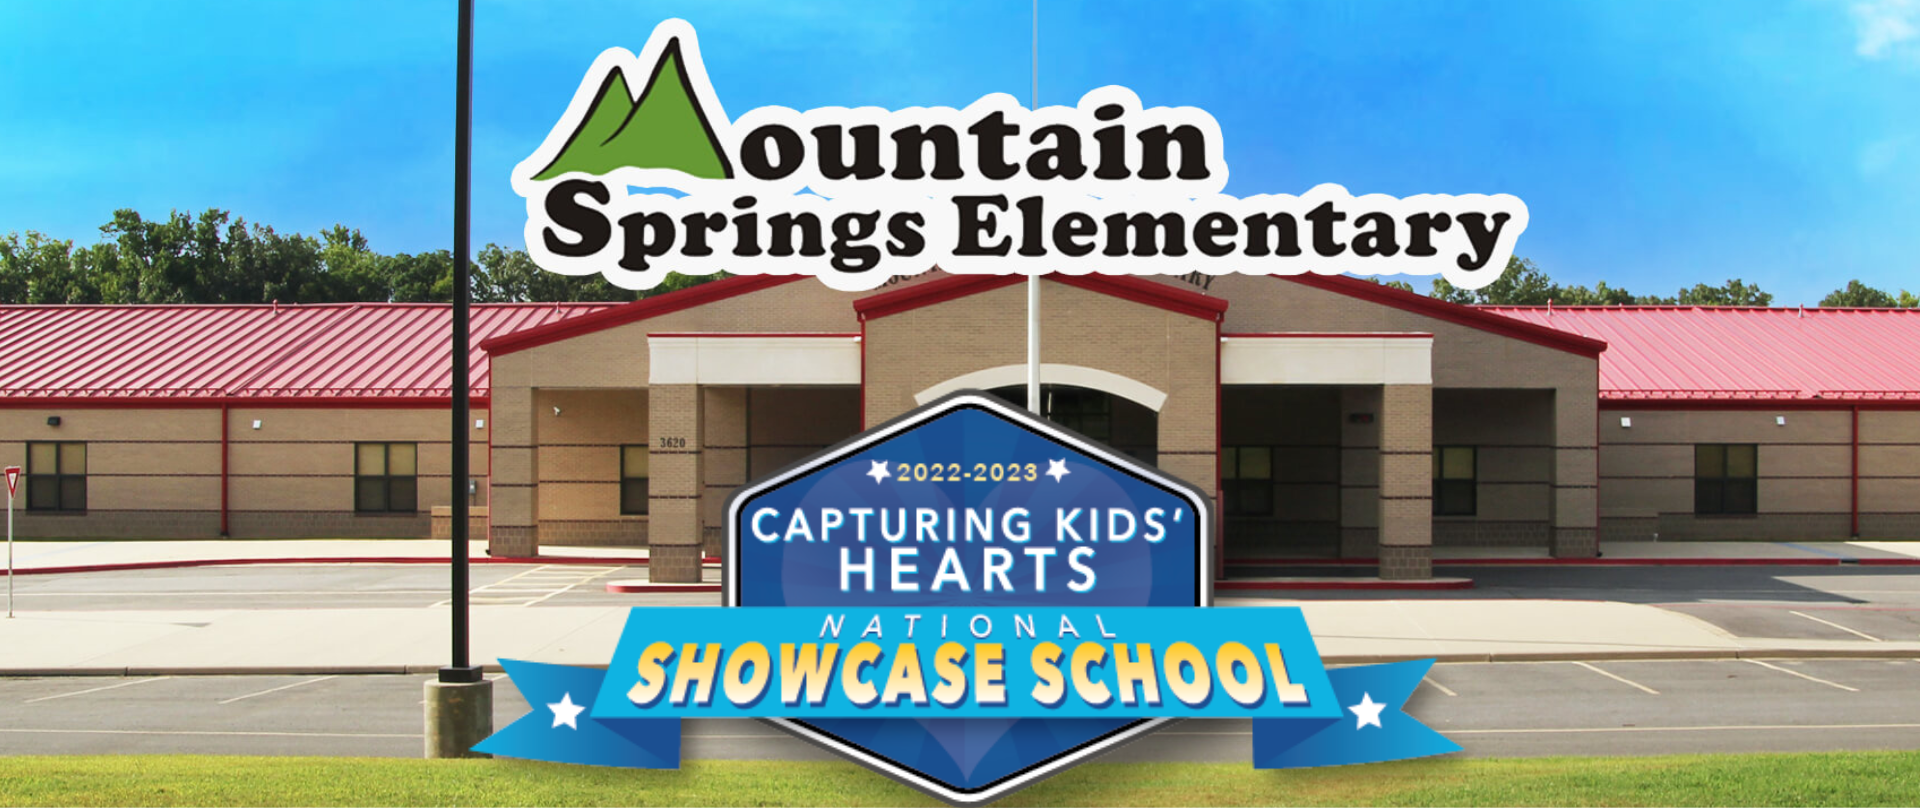 Capturing Kids Hearts Mountain Springs